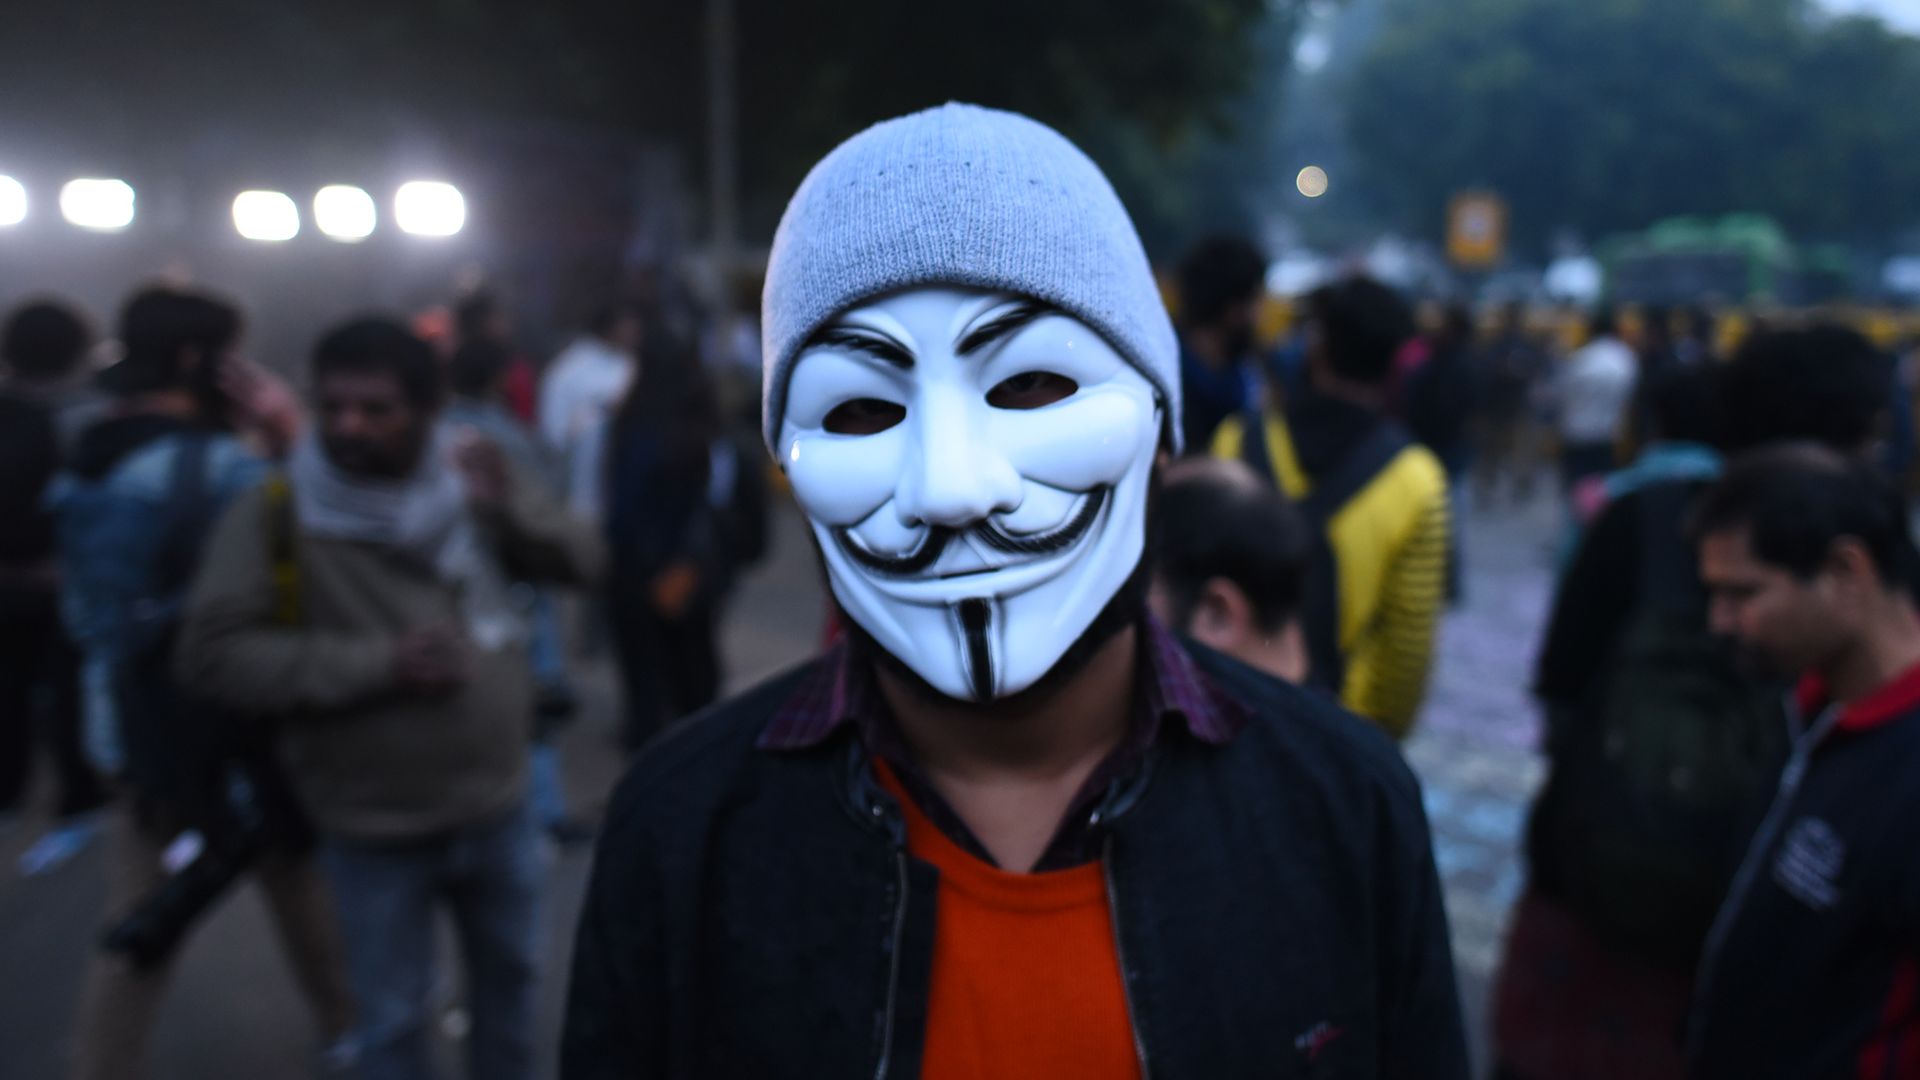 Protester wearing guy fawkes mask